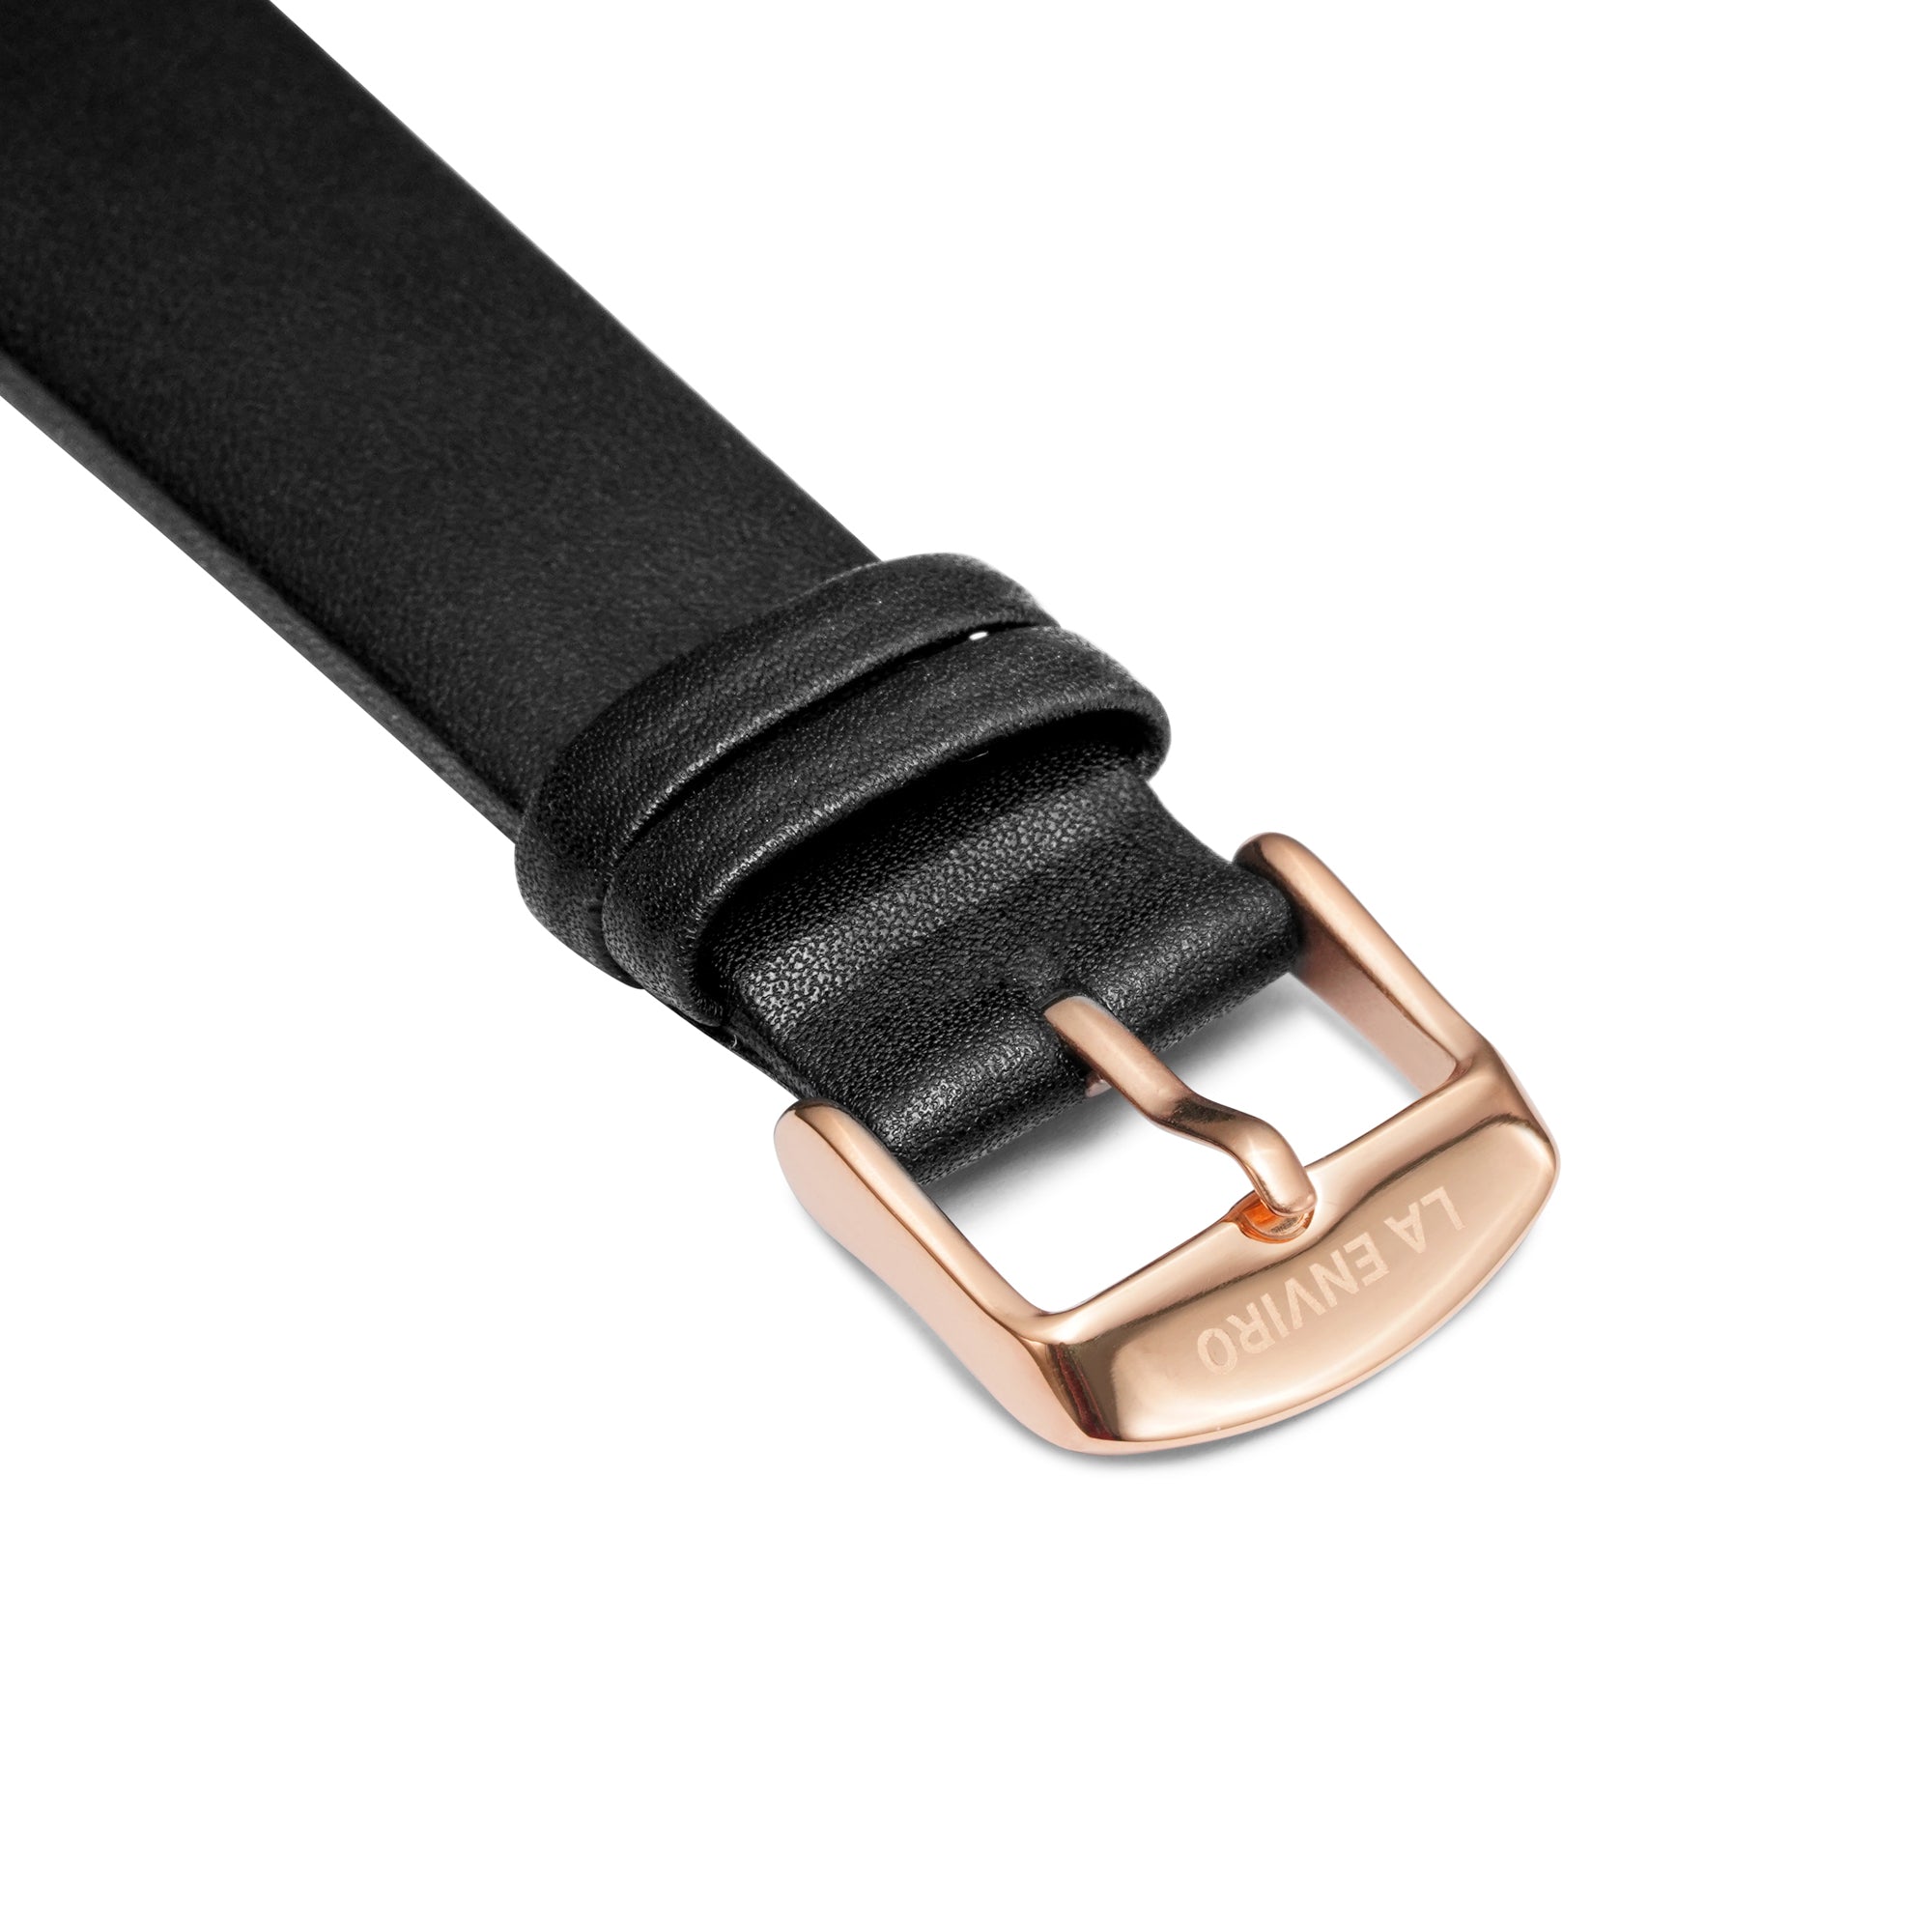 ROSE GOLD WITH BLACK STRAP I CLASSIC 40 MM